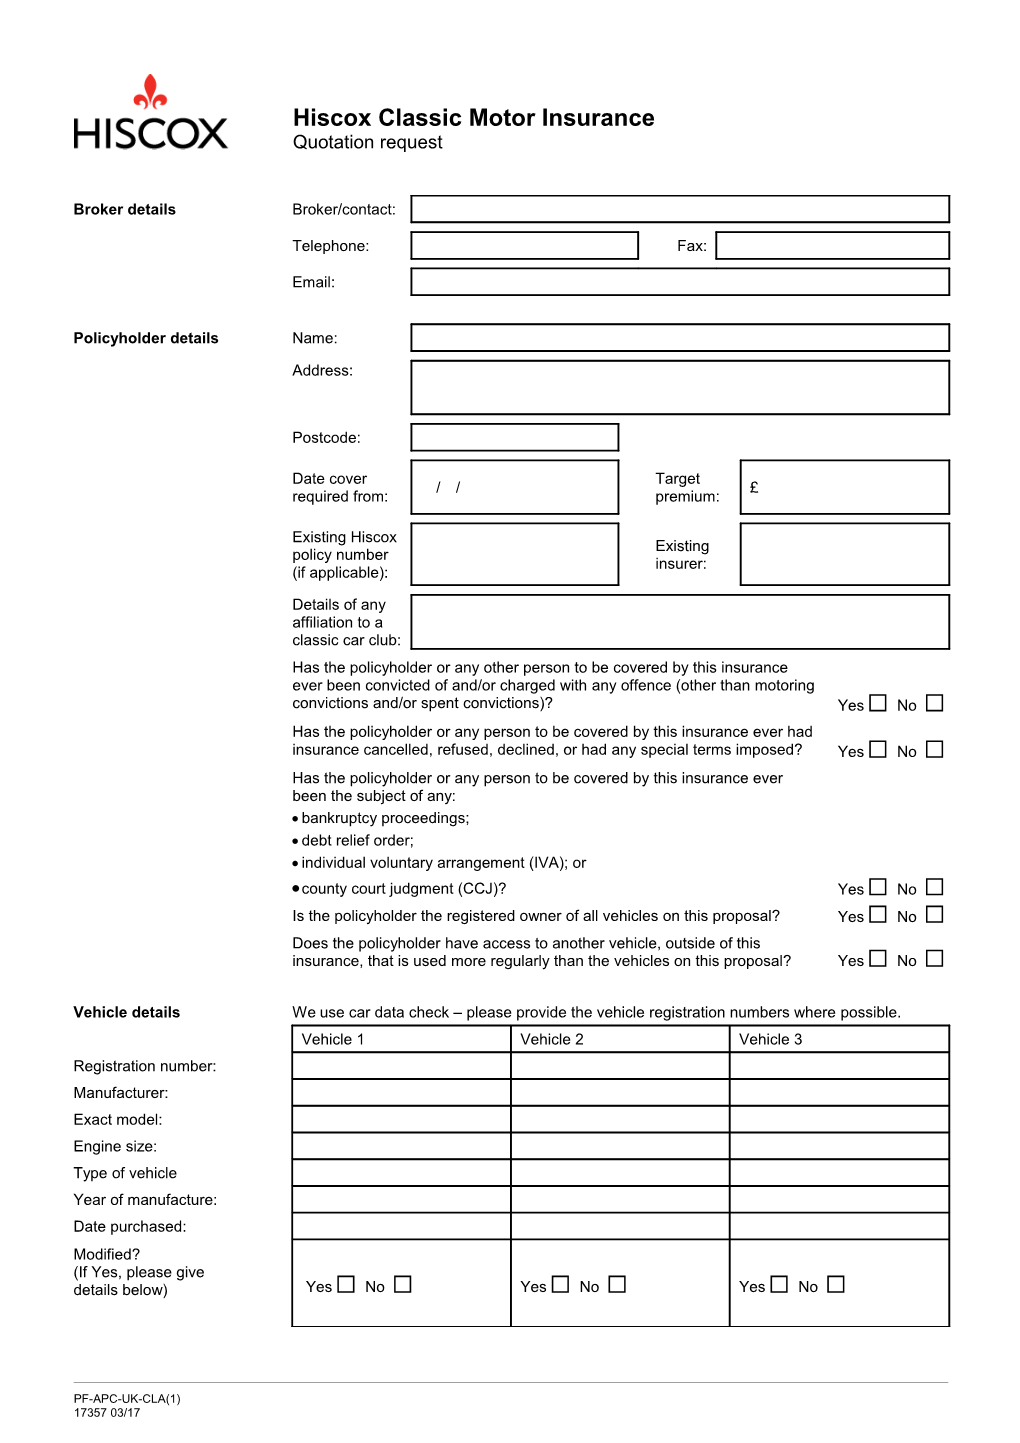 Classic Motor Insurance - Quotation Request Form